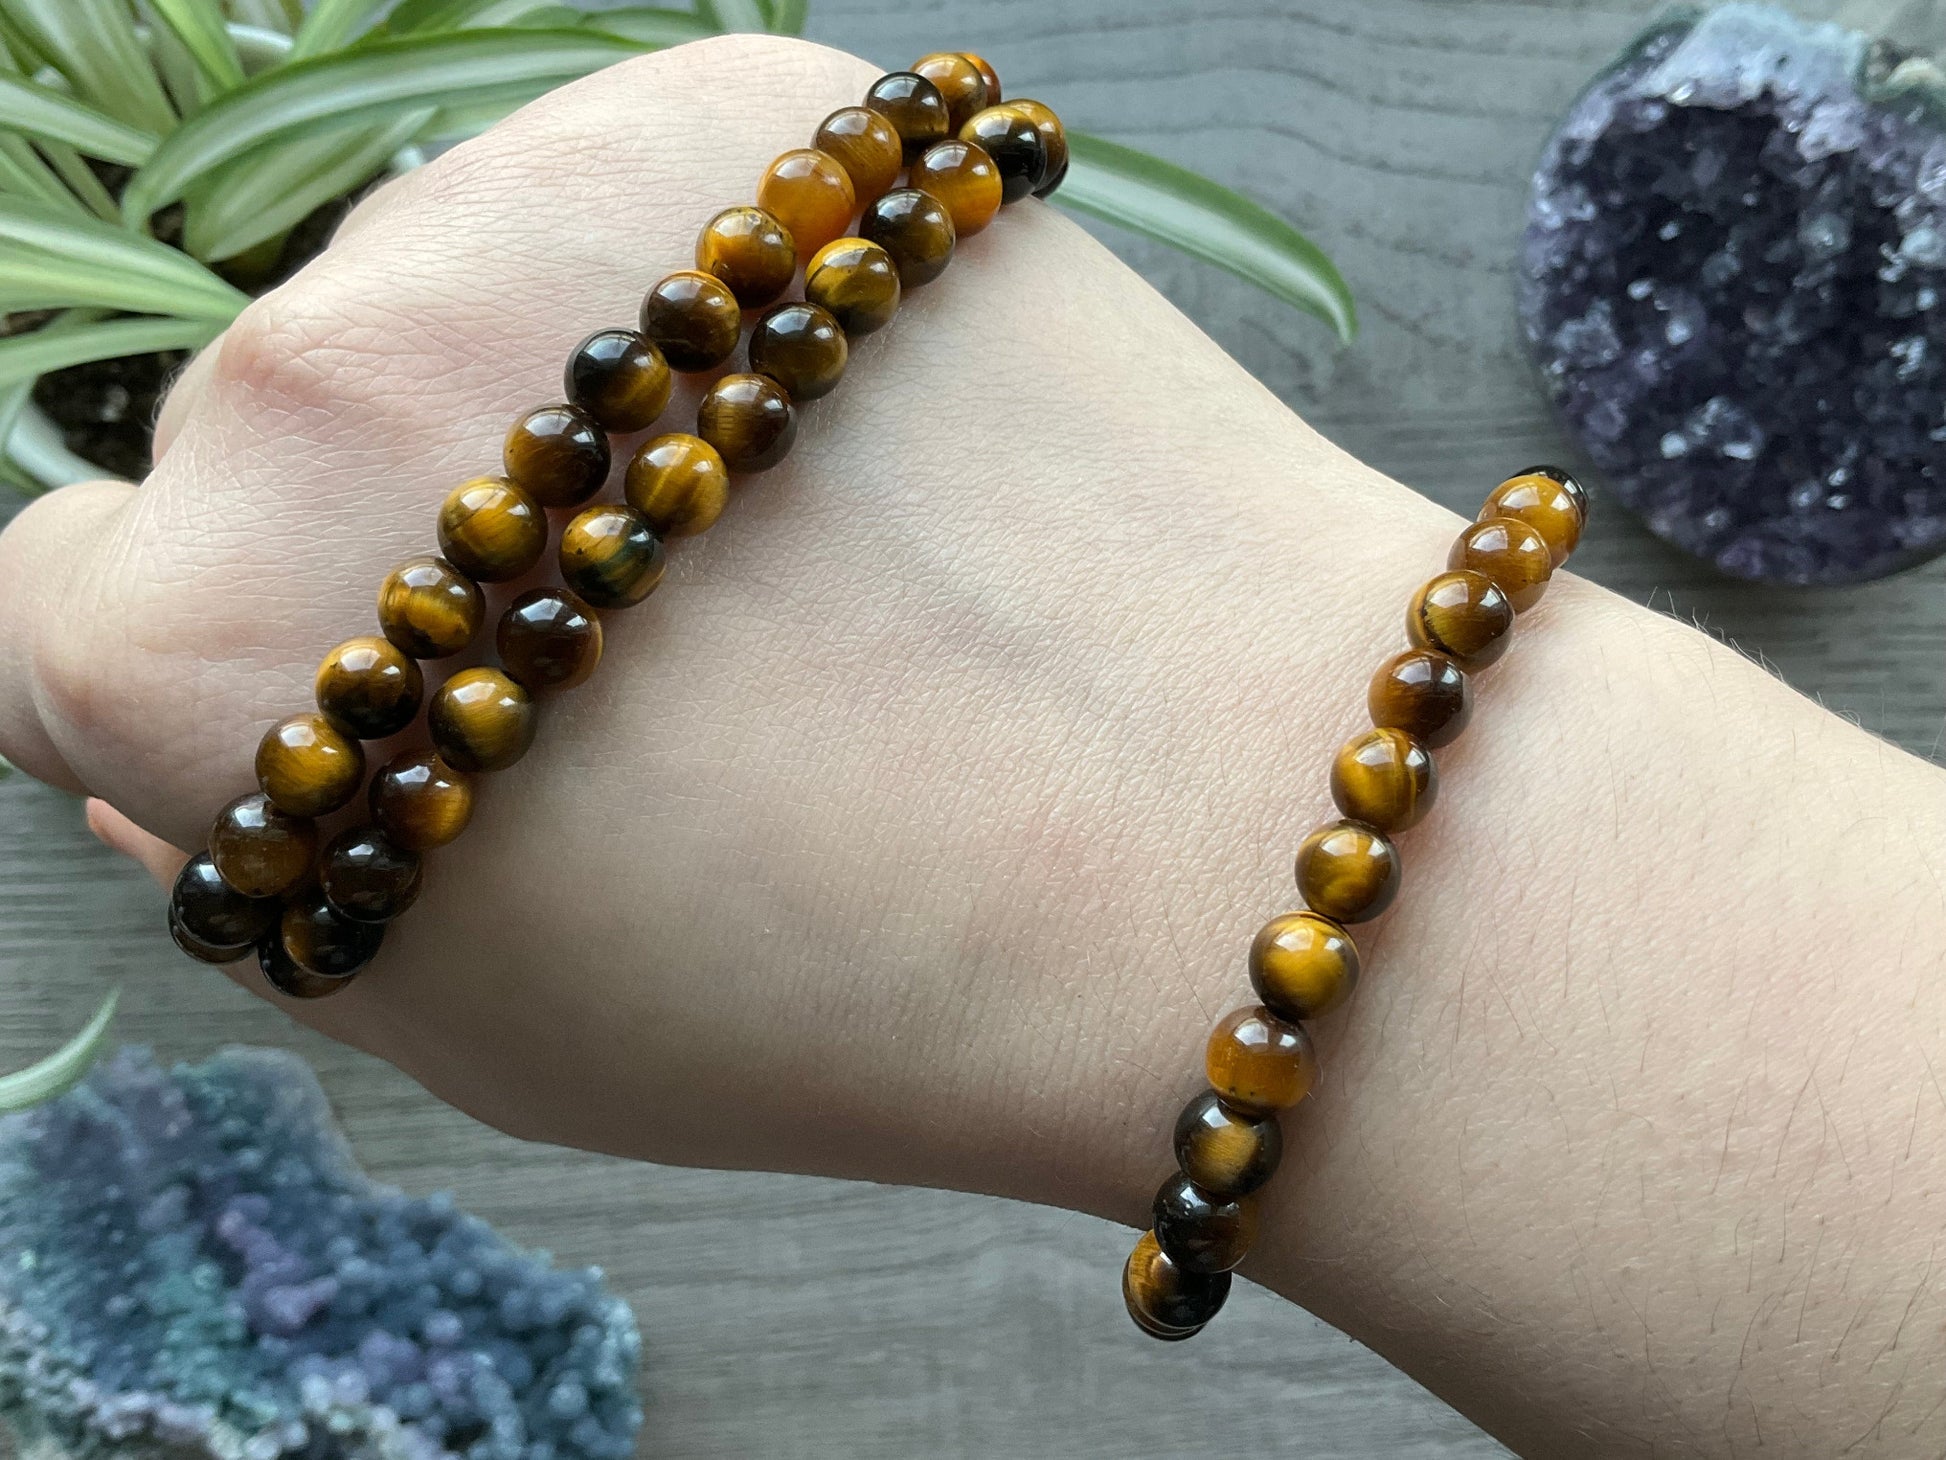 Pictured is a yellow tiger's eye bead bracelet.